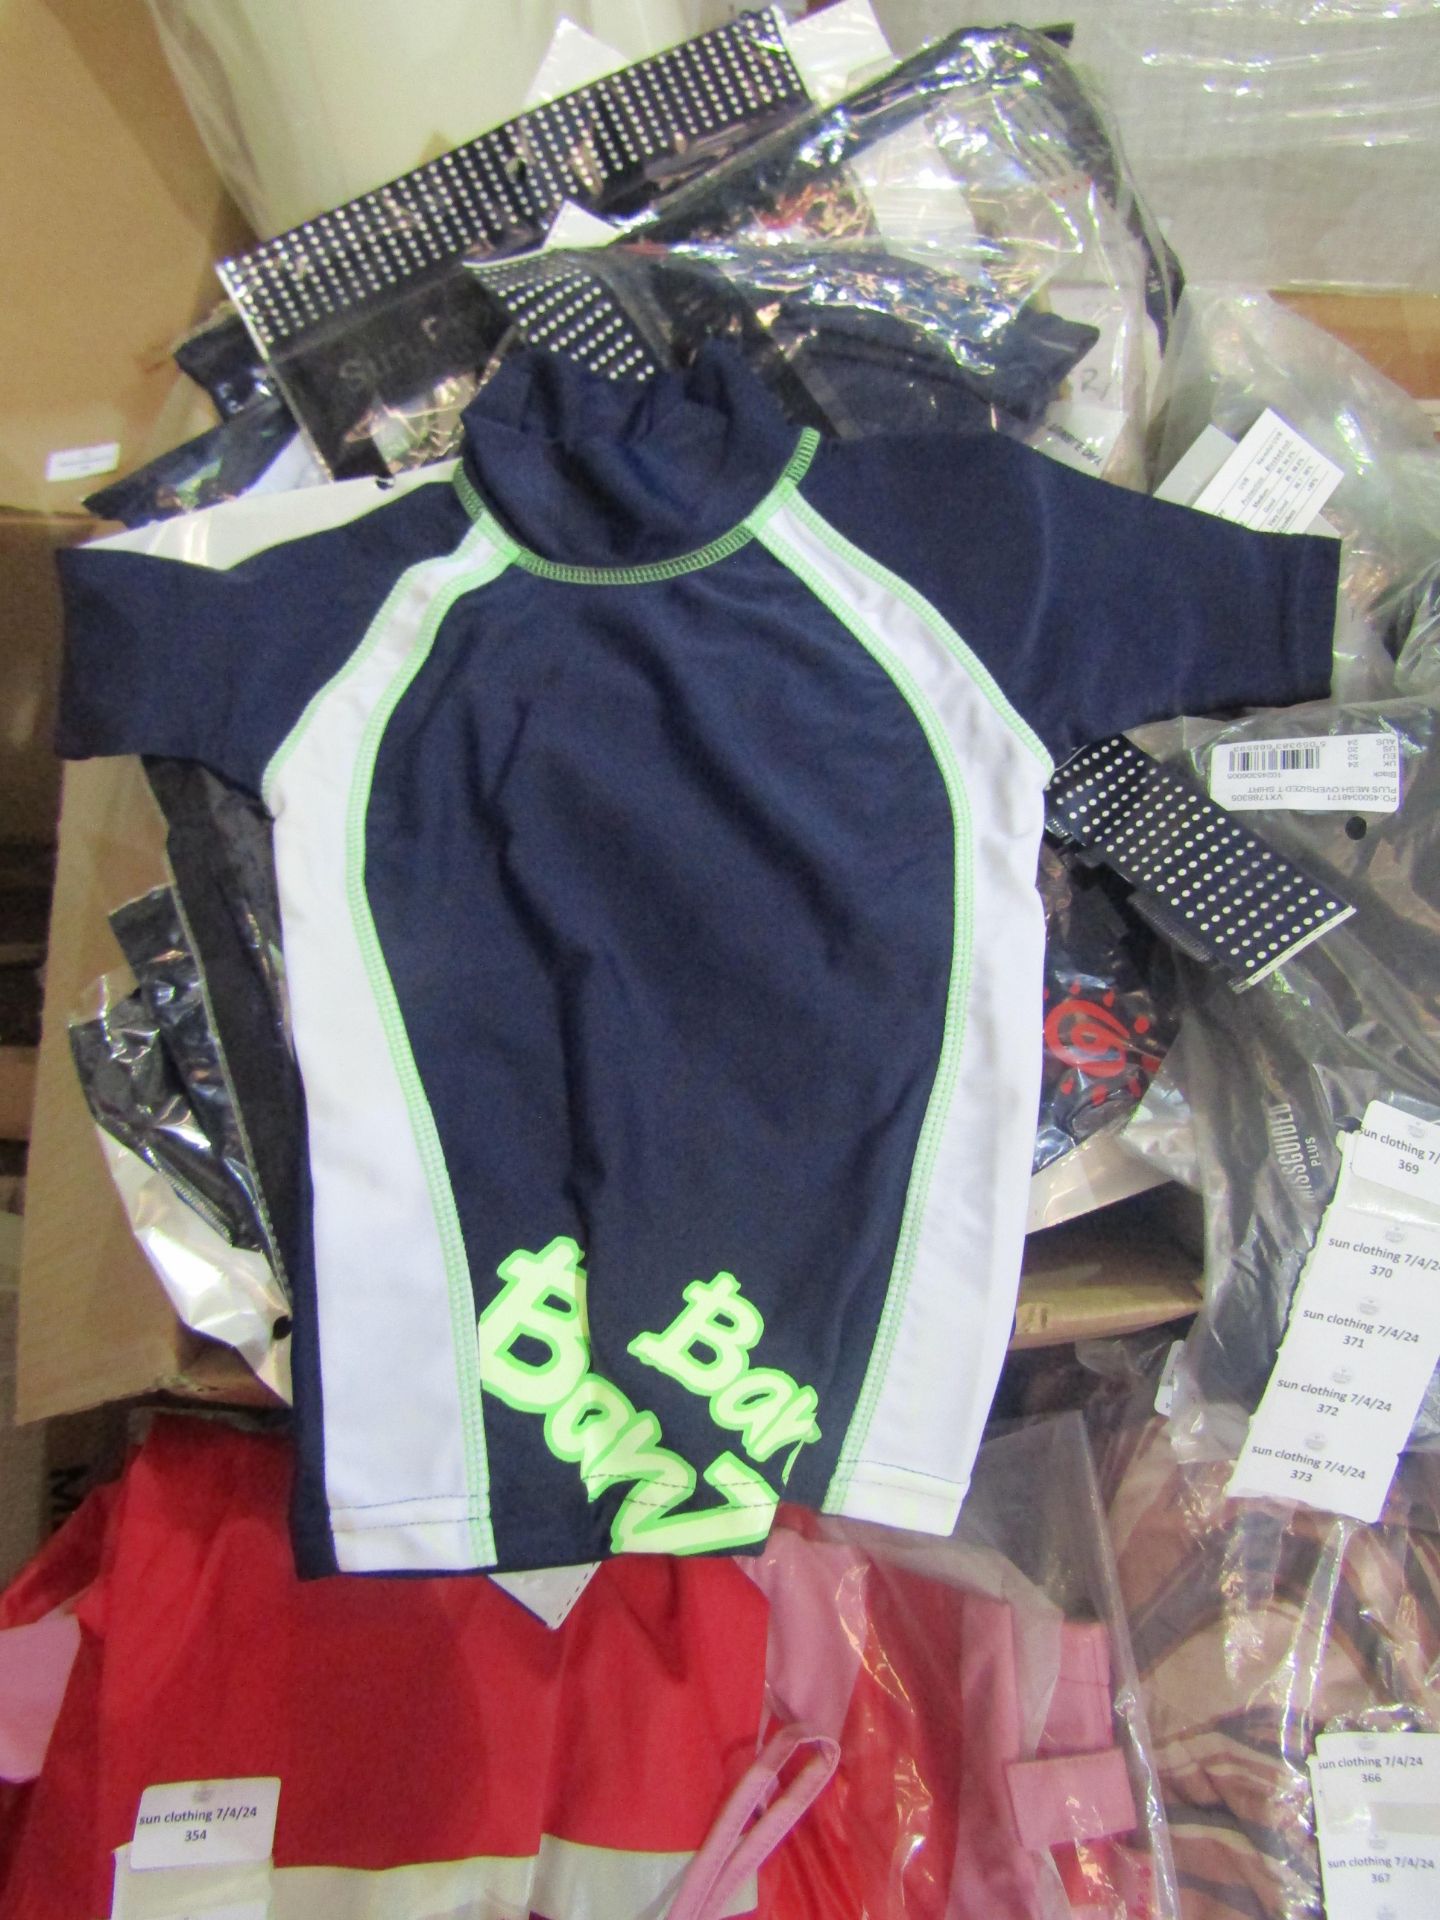 2x Banz Sun Protection Suit, Size 12 Month, New & Packaged.2